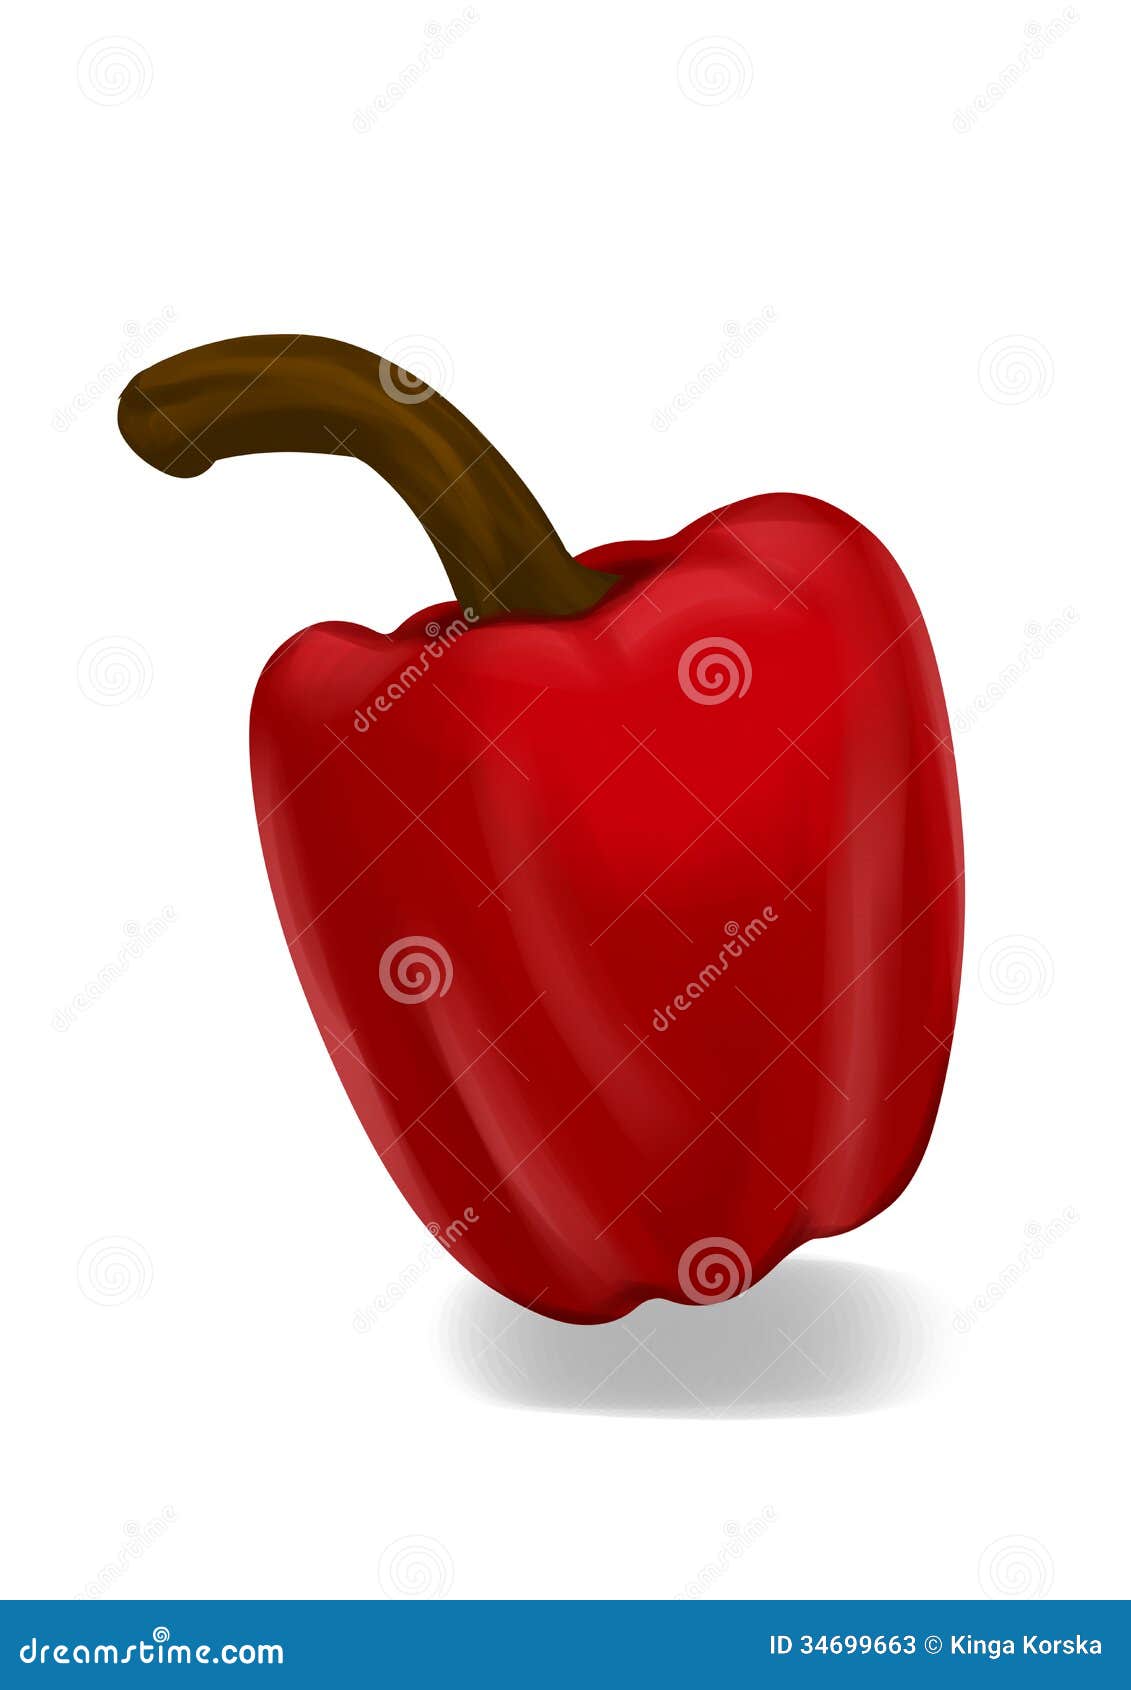 Red Pepper Illustration Stock Photos - Image: 34699663